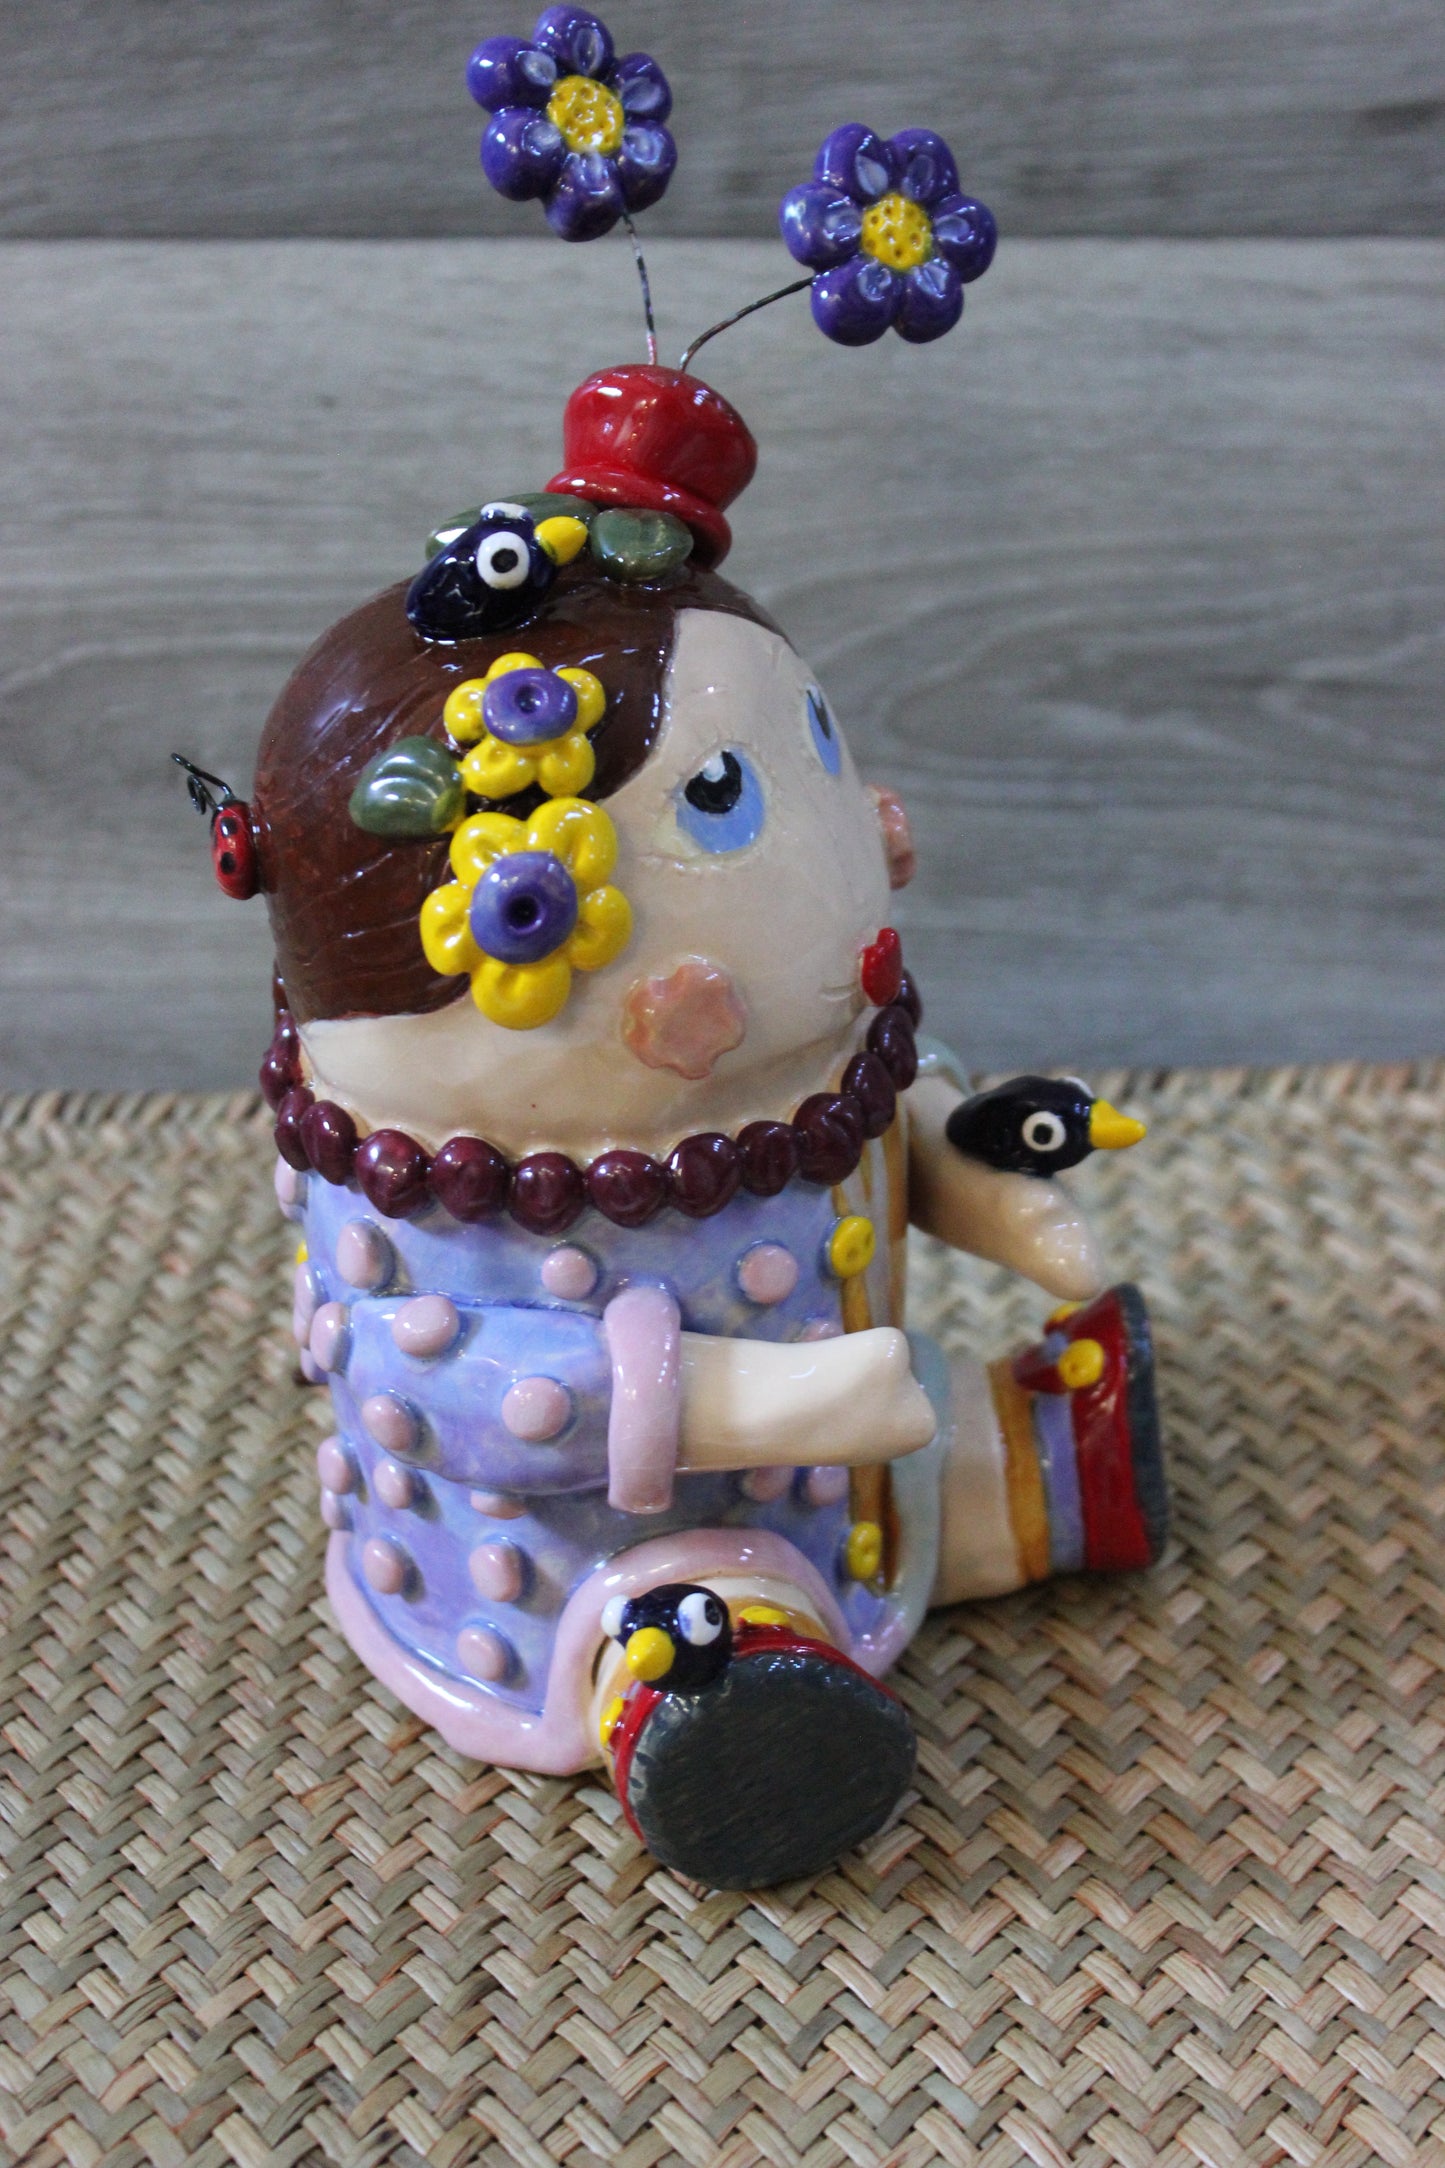 Ceramic Brown Haired Girl Doll Sculpture with Flowers, Birds and Ladybugs